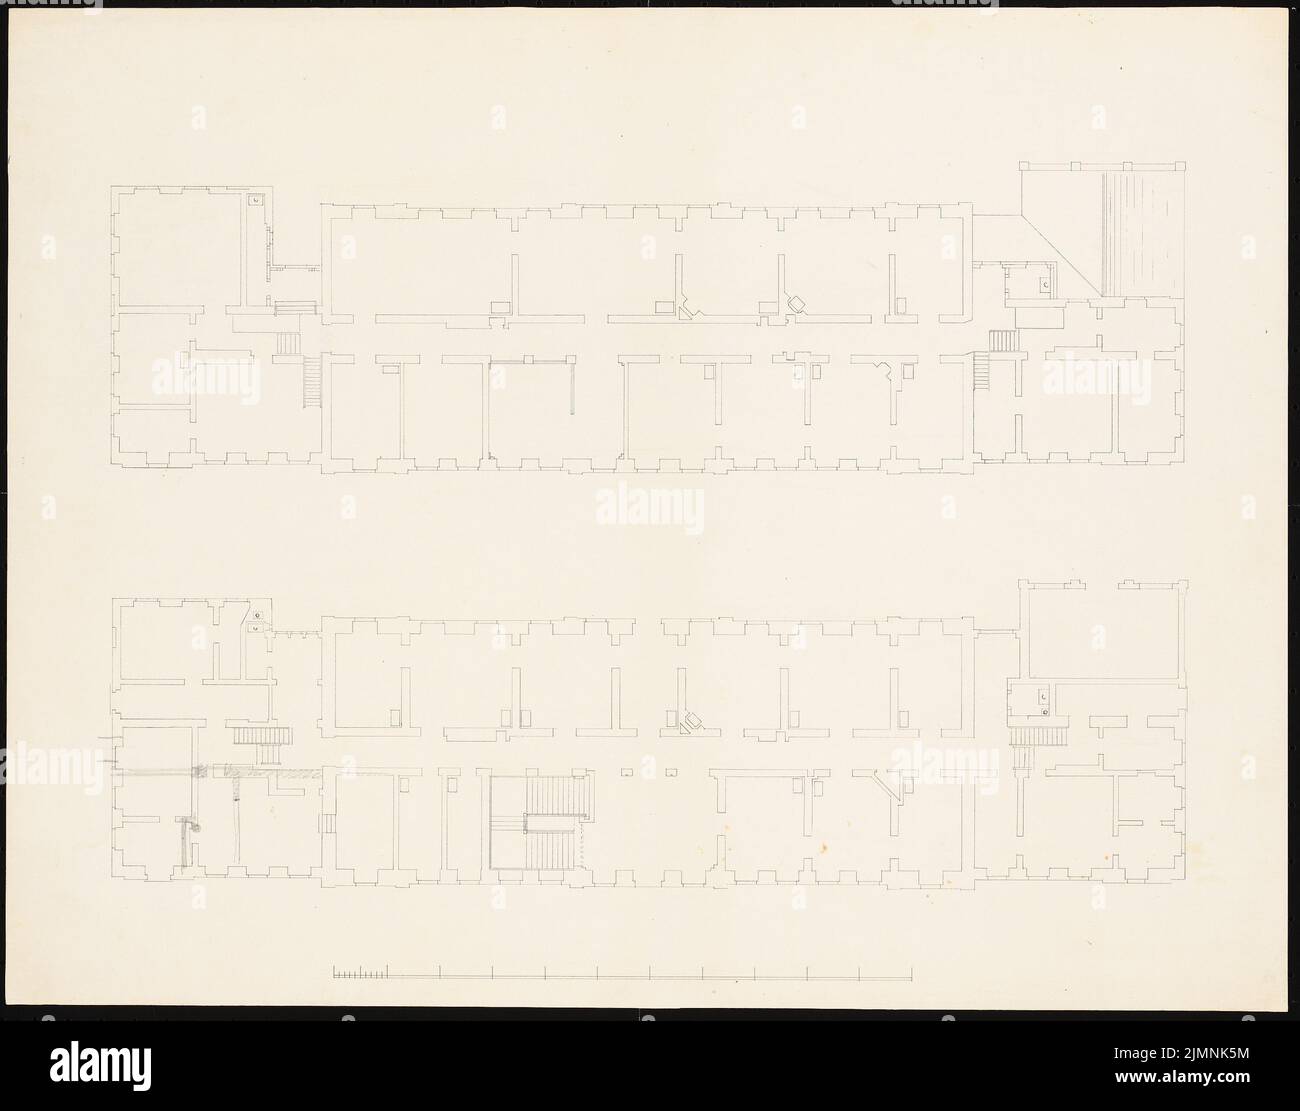 Knoblauch Eduard (1801-1865), manor house in Golßen. Conversion (1852): floor plan ground and upper floor. Ink and pencil, 43.3 x 55.1 cm (including scan edges) Stock Photo